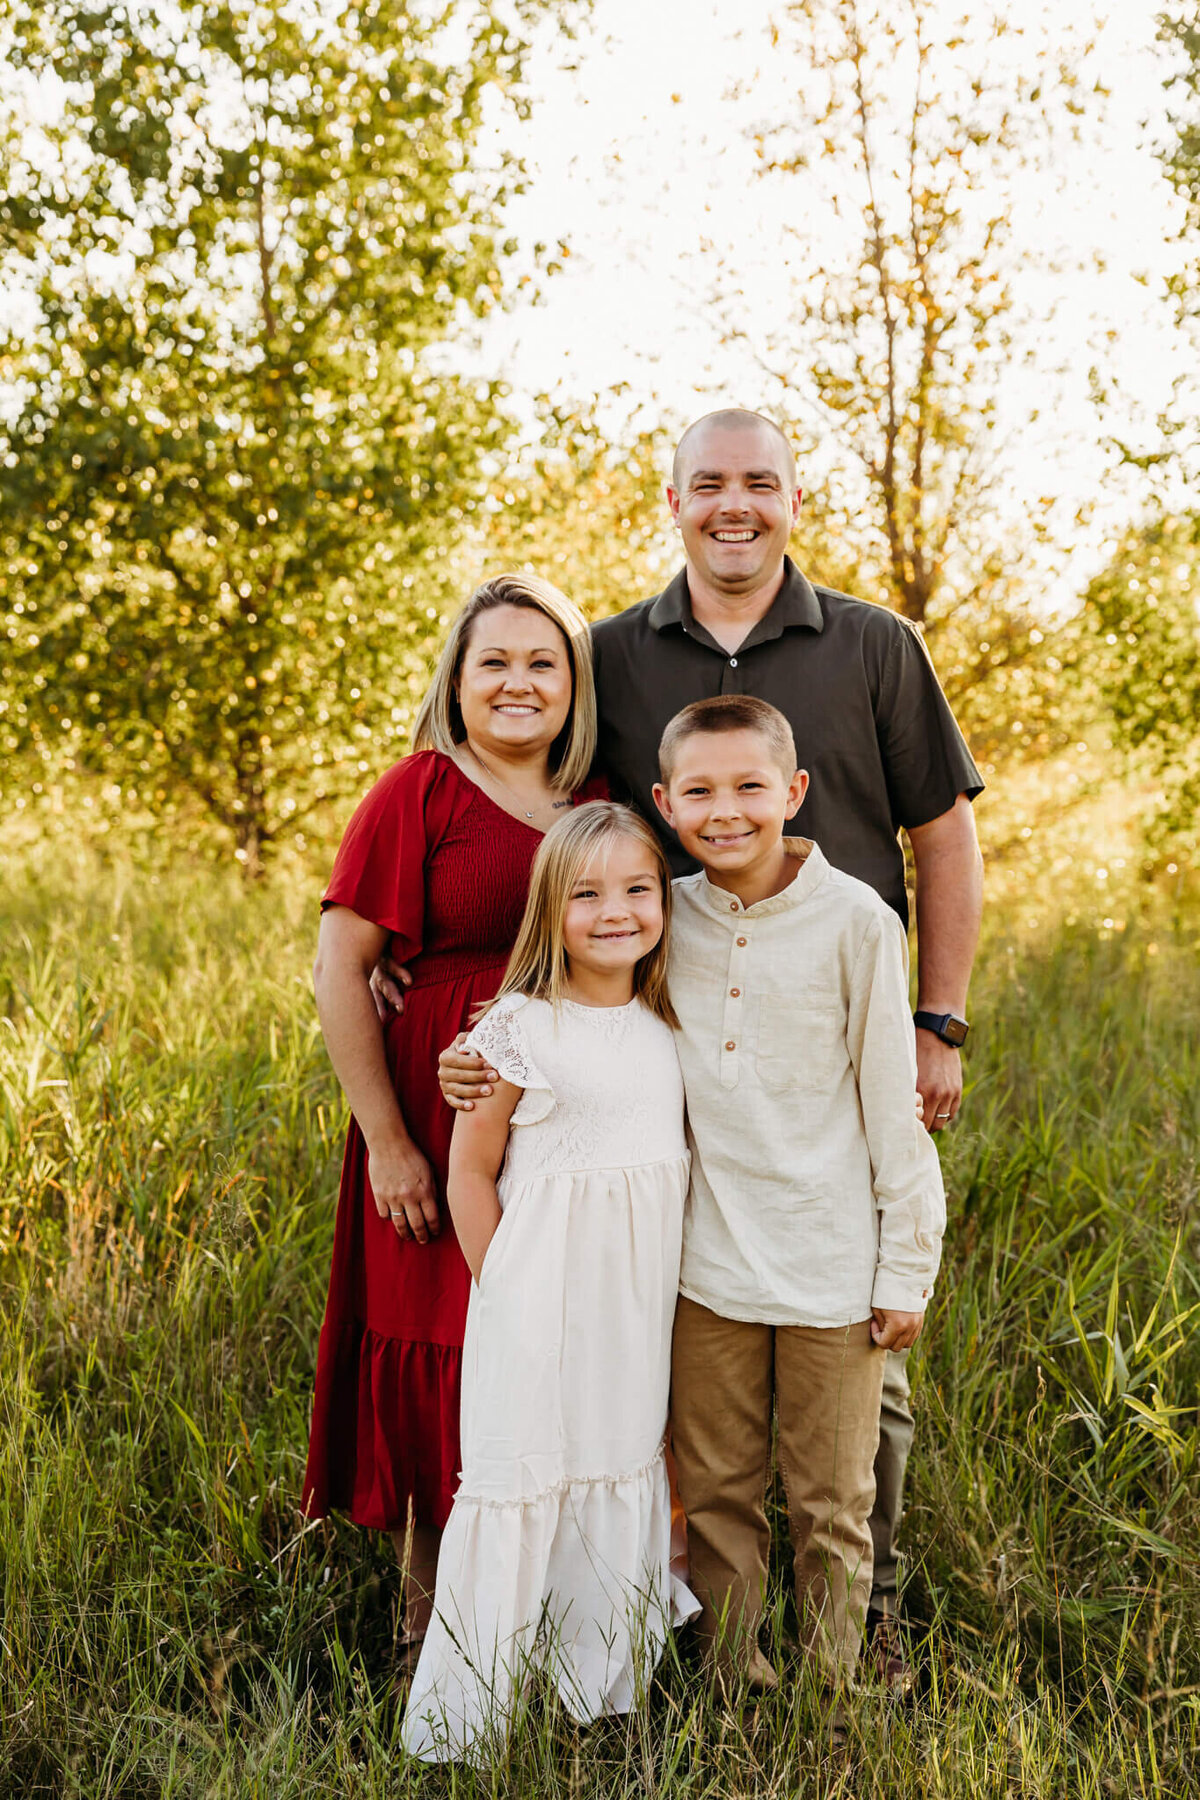 husband and wife smiling with their children  for family photos .